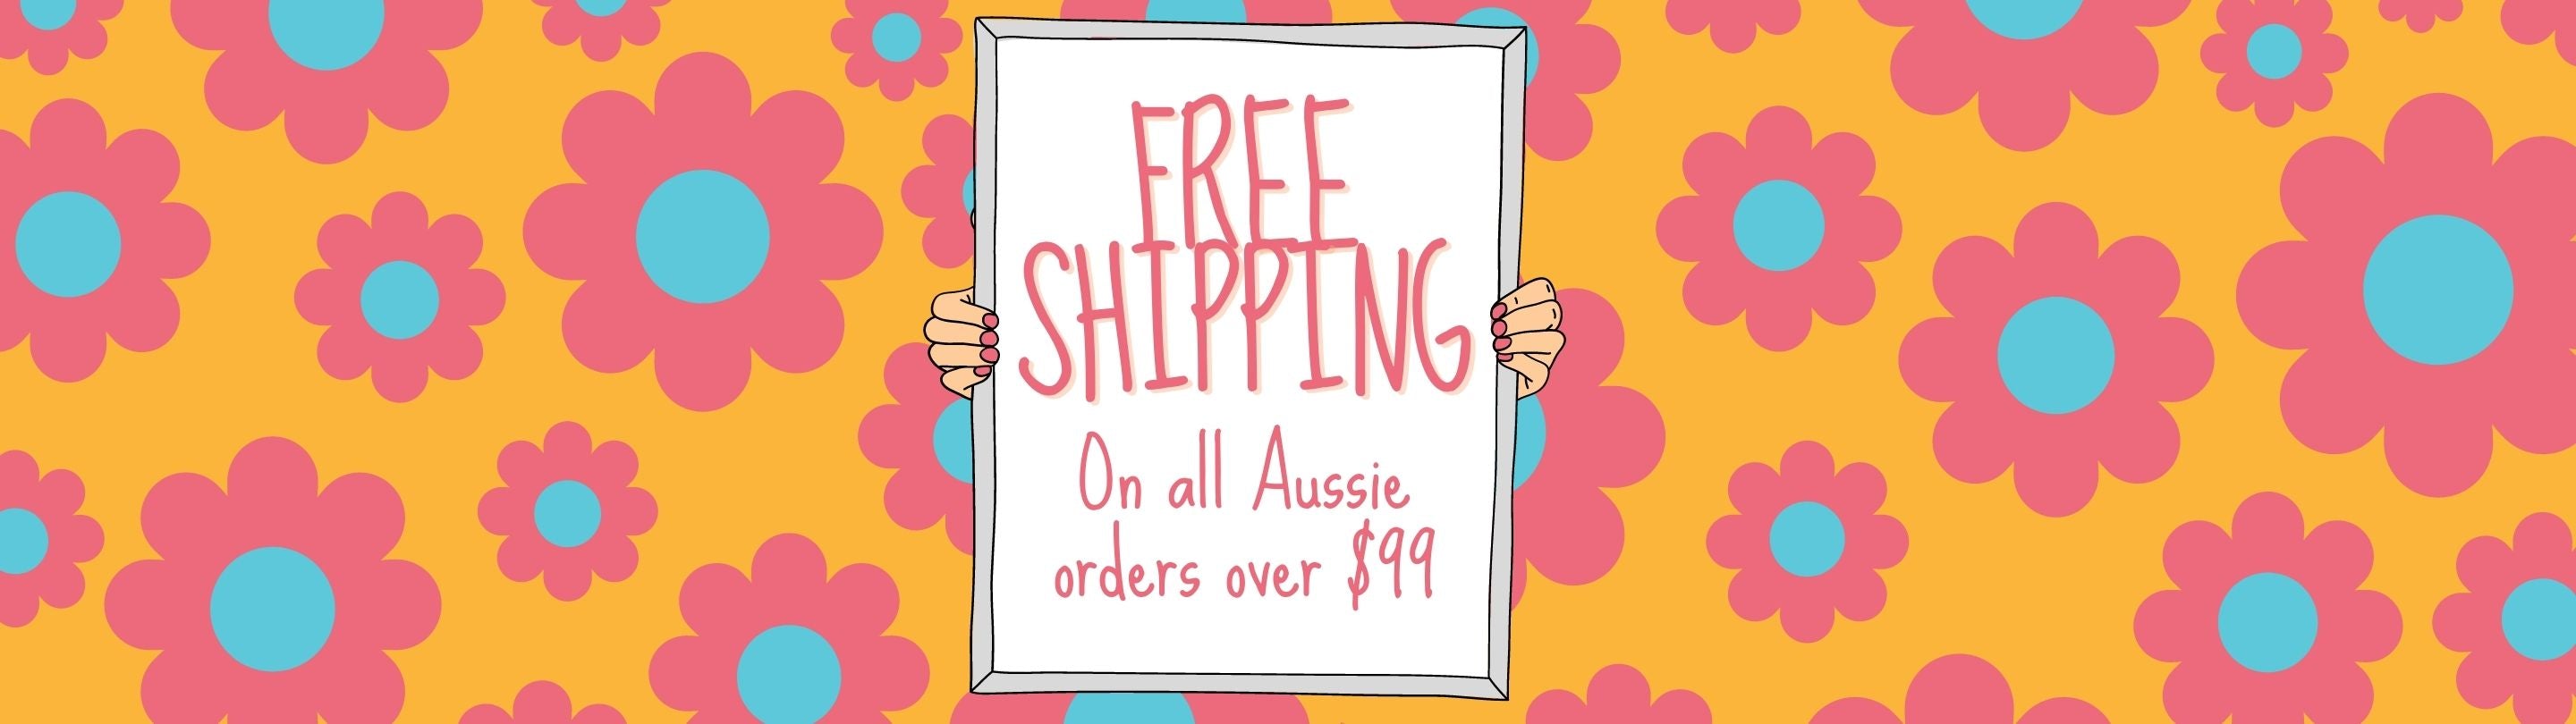 Free shipping on all Australian orders over $99